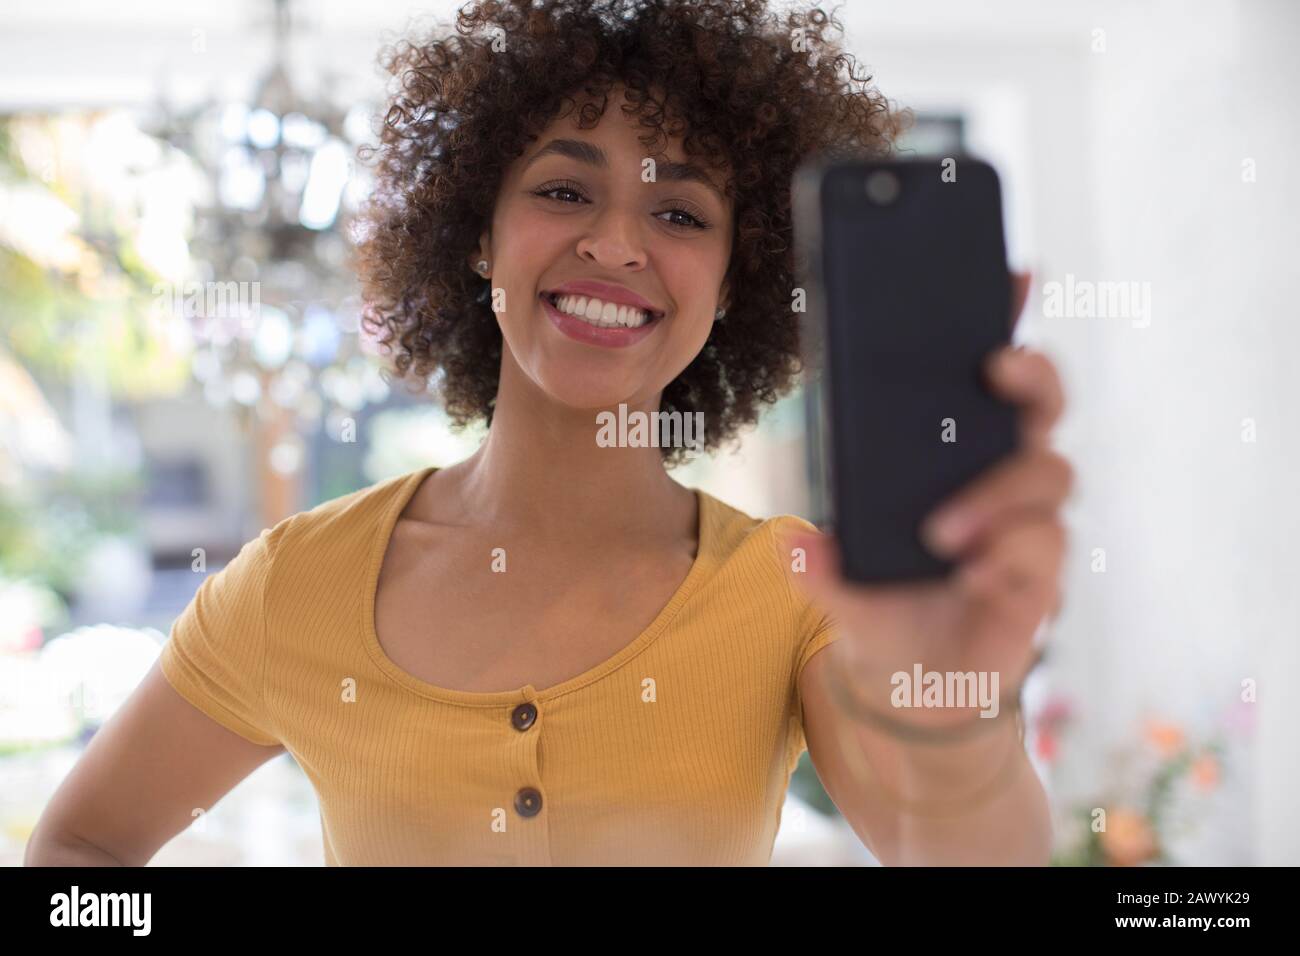 Happy young woman taking selfie with camera phone Stock Photo